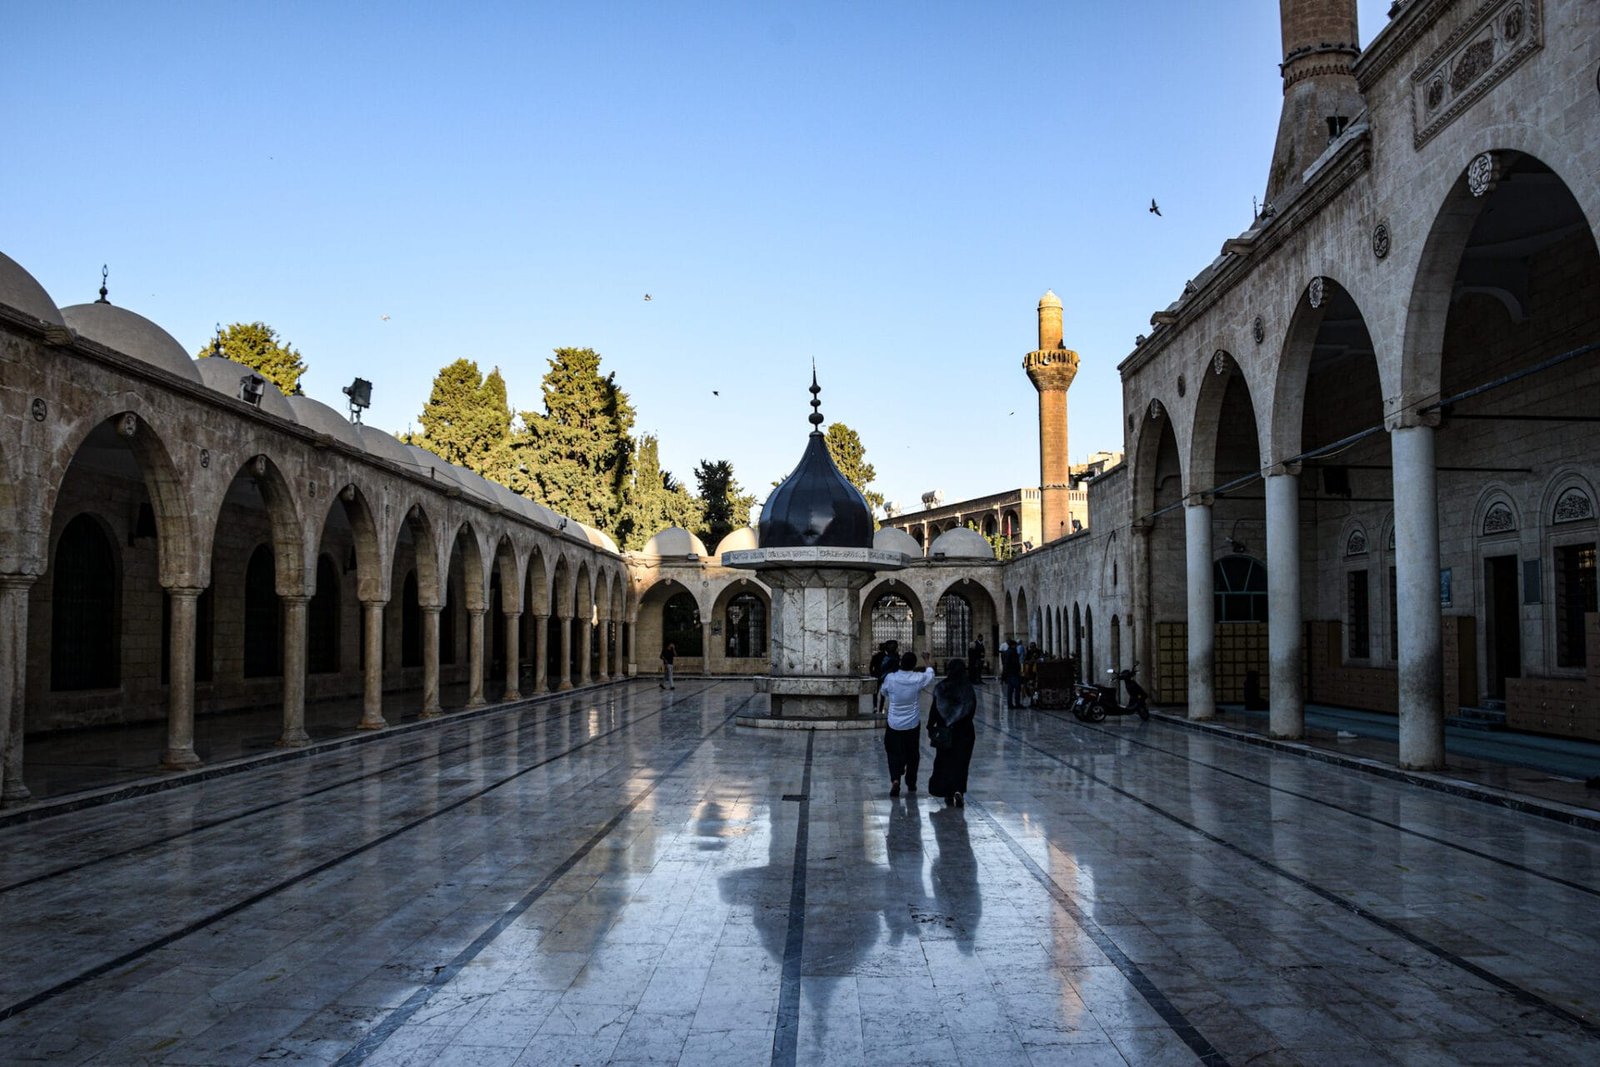 a family walks across the reflecting courtyard in front of a mosque